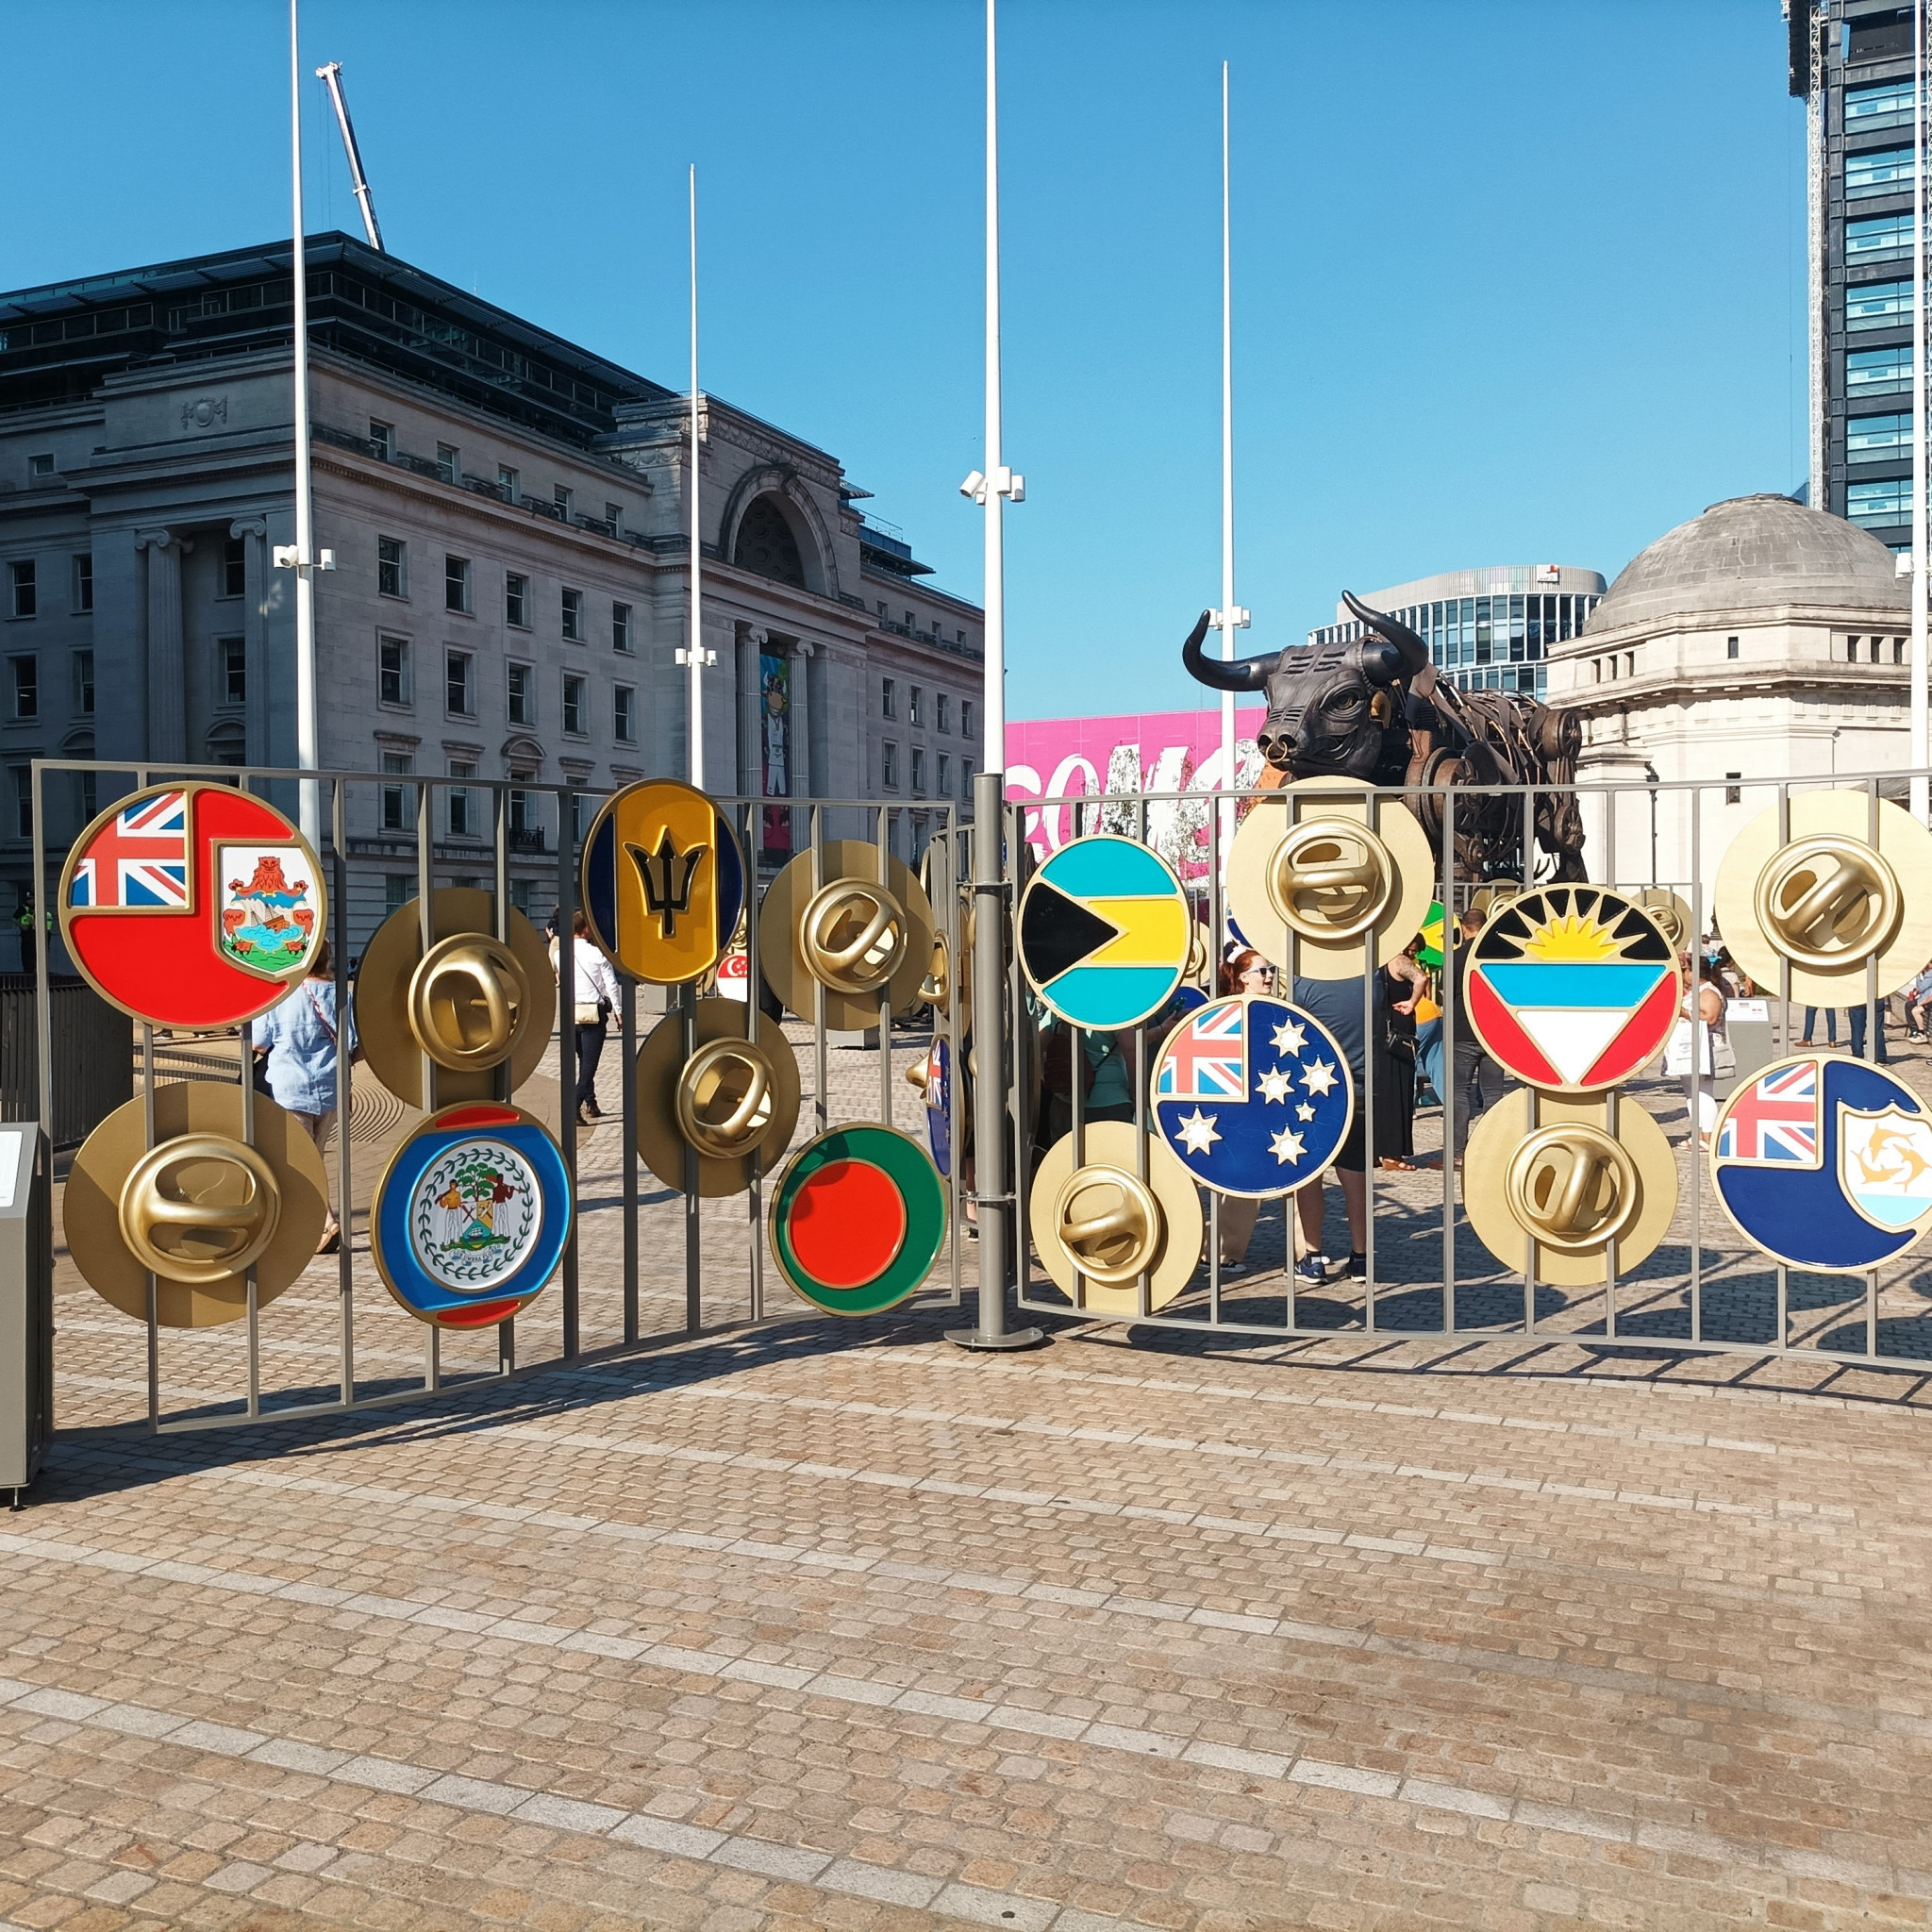 The outsize pins were a popular attraction during the Commonwealth Games in Birmingham ©ITG